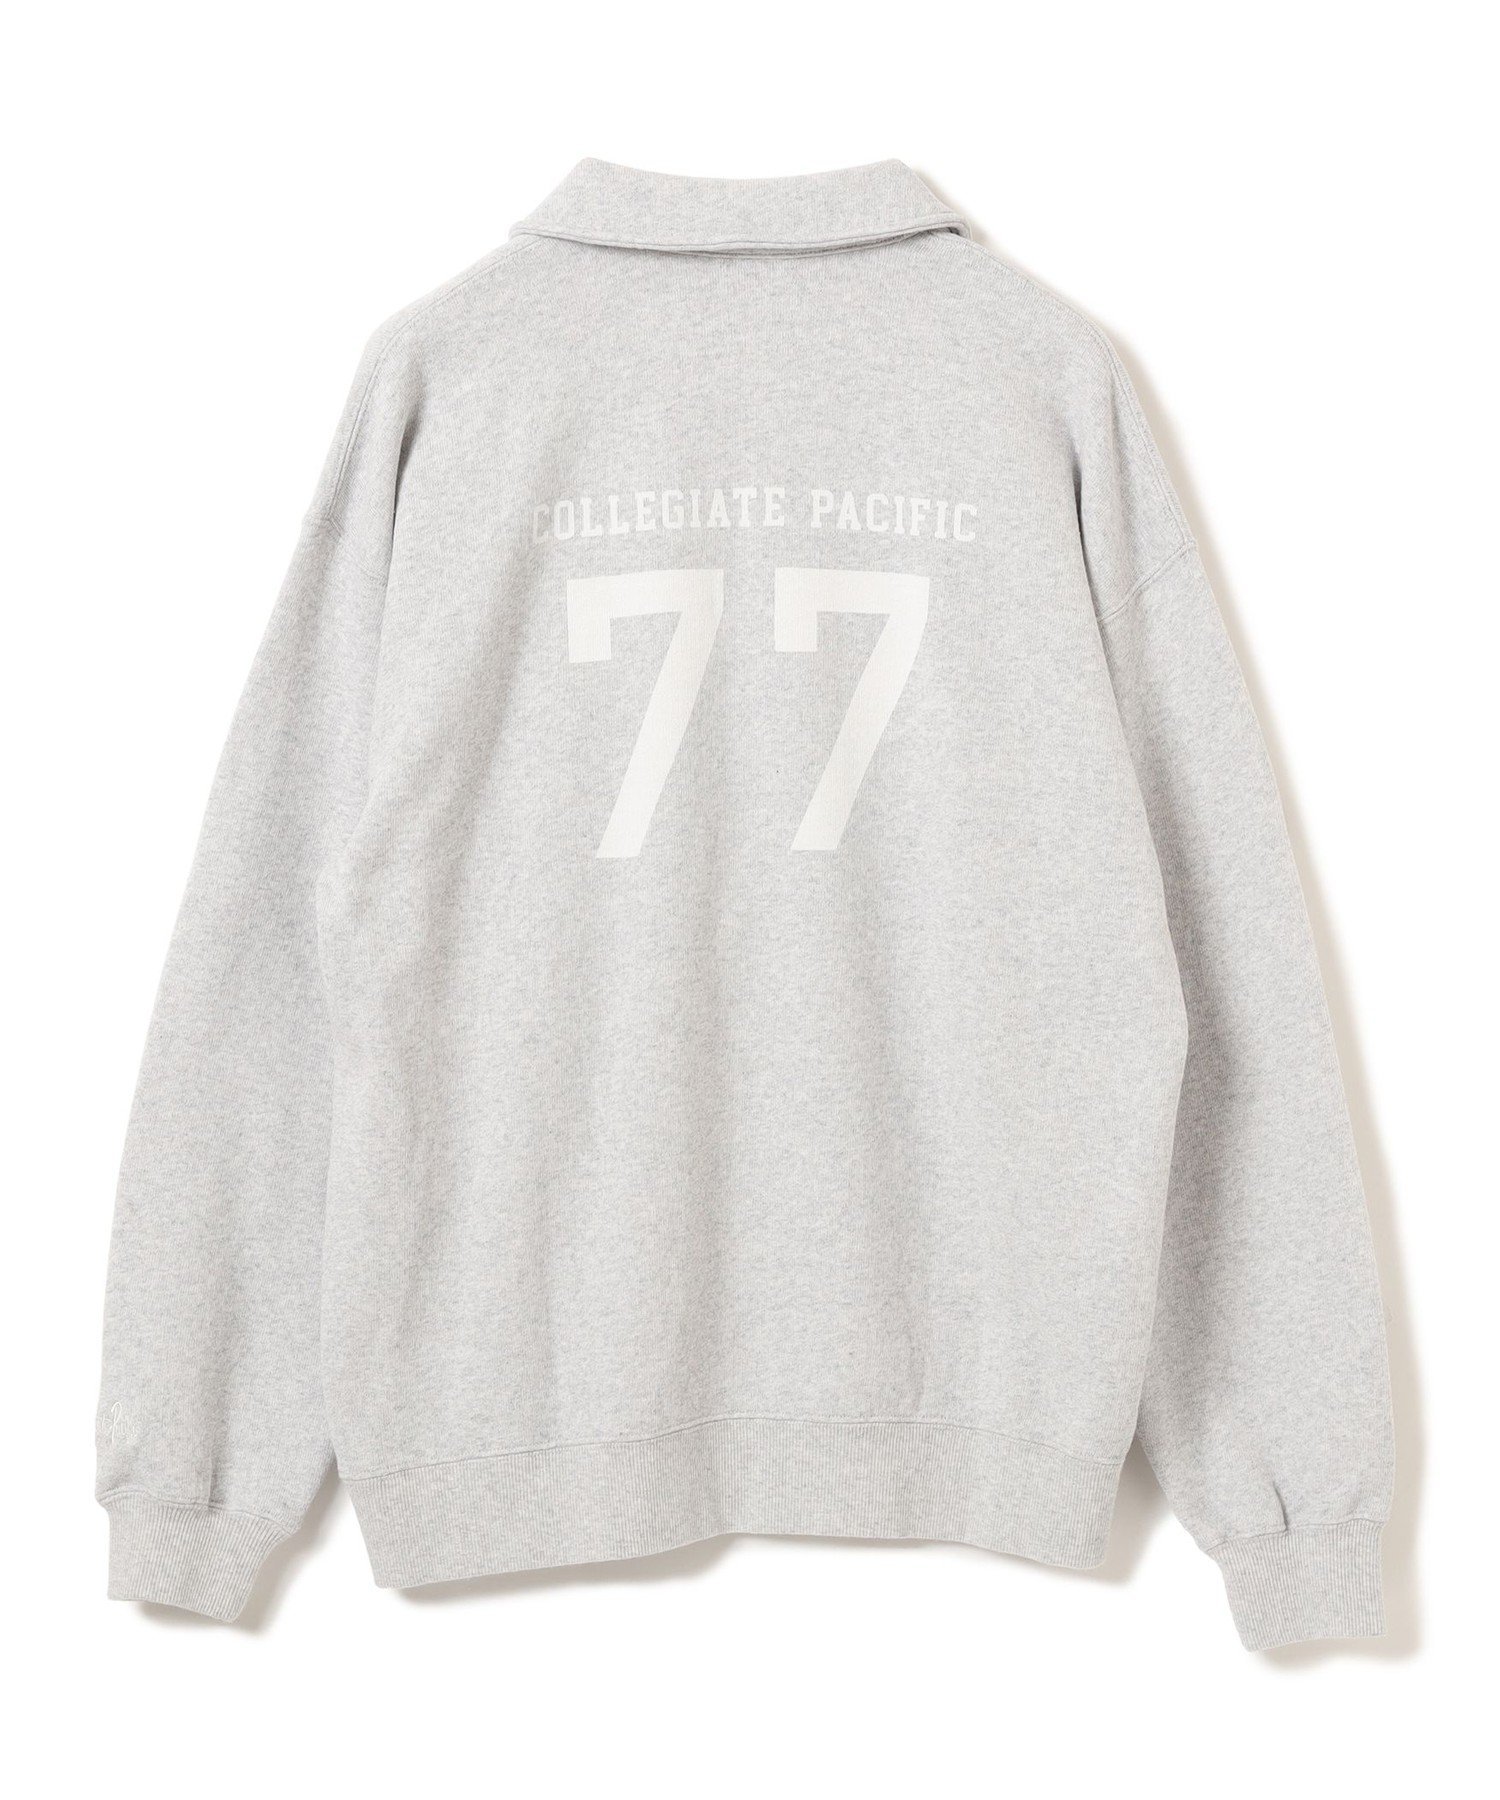 Collegiate Pacific * B:MING by BEAMS / 別注 ハーフジップ スウェット 23AW